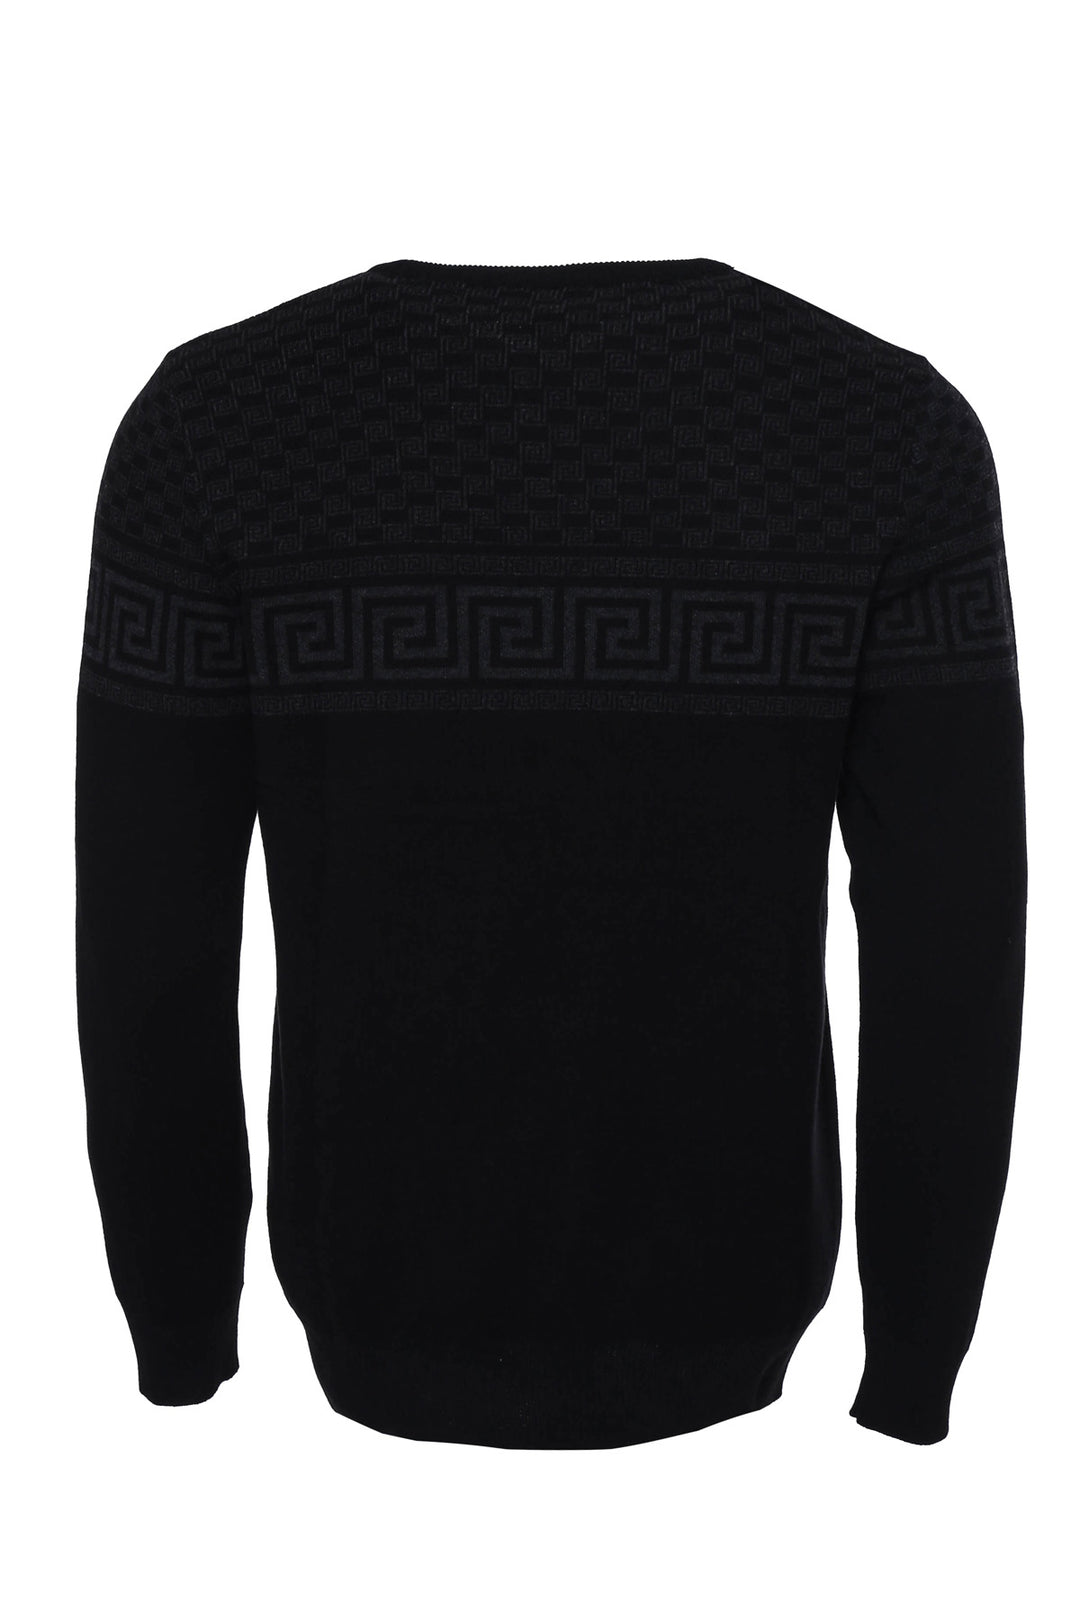 Crew Neck Knitwear Chest Patterned Over Black - Wessi